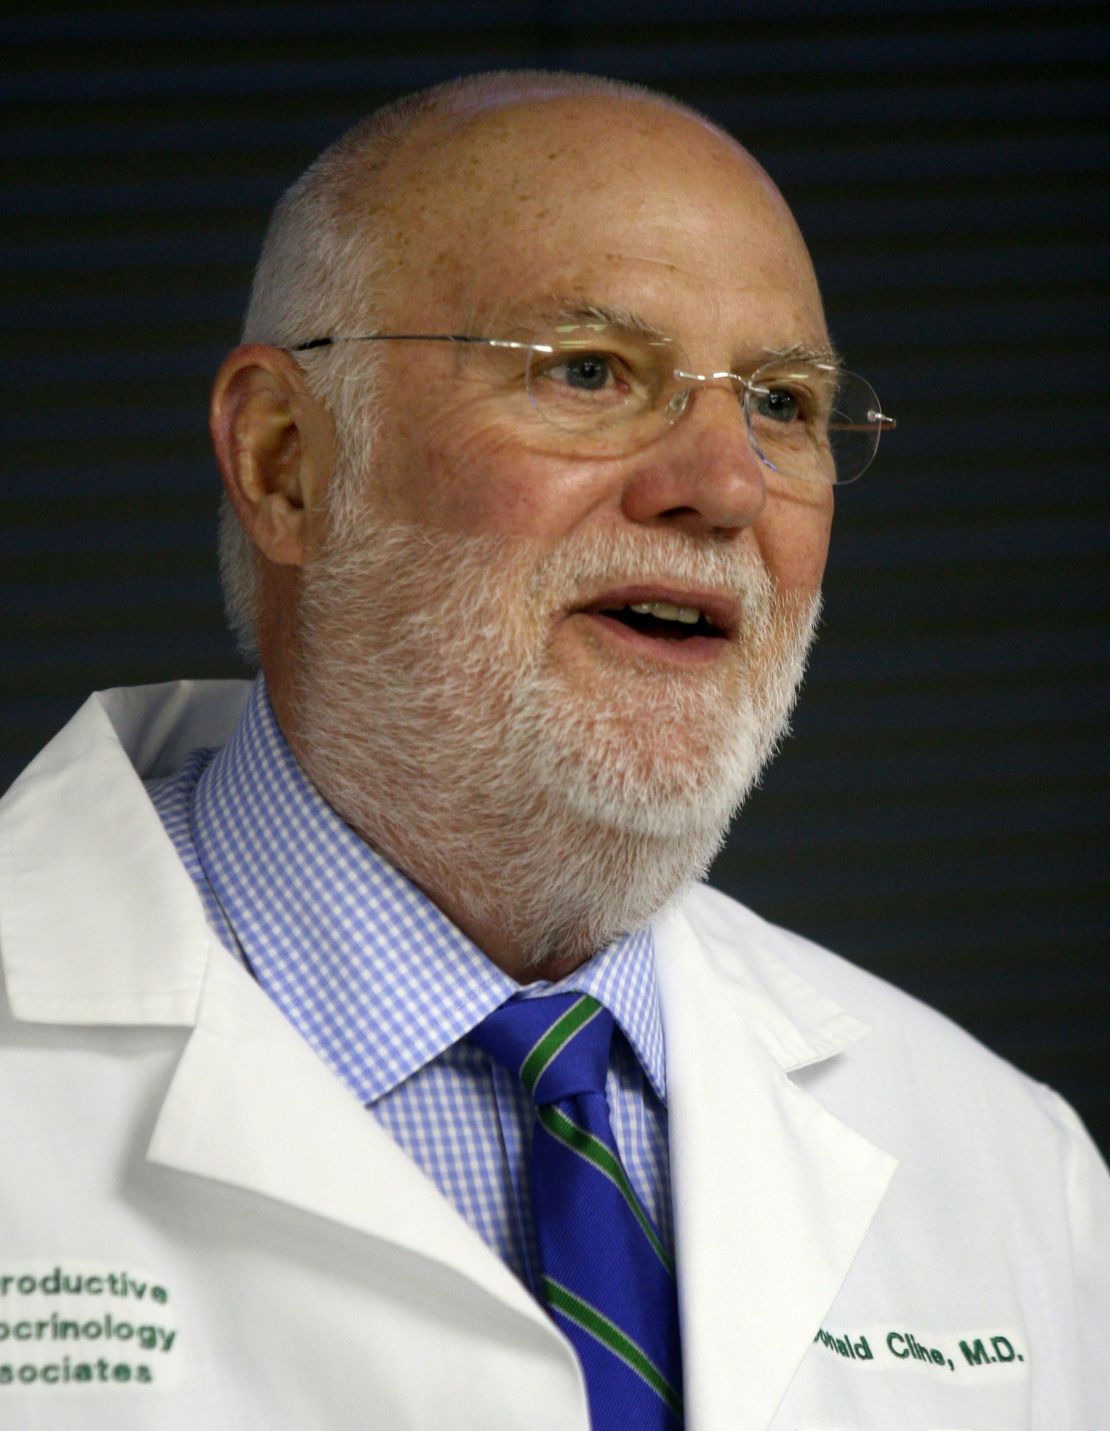 In this March 29, 2007 file photo, Dr. Donald Cline, a reproductive endocrinologist and fertility specialist, speaks at a news conference in Indianapolis.